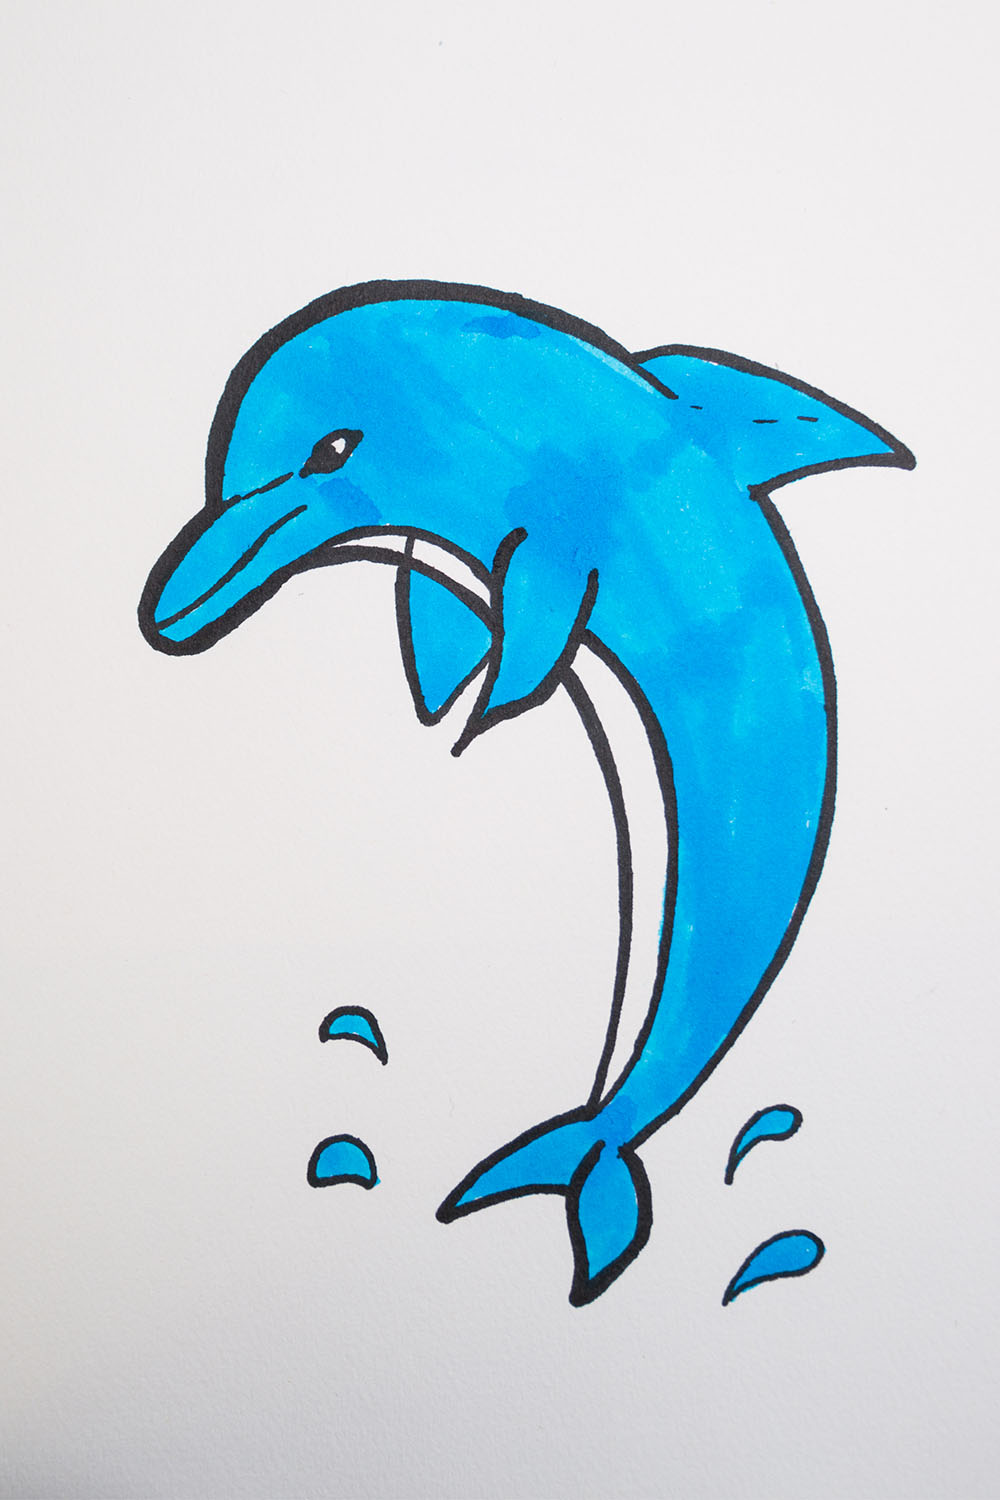 How to draw and color dolphins